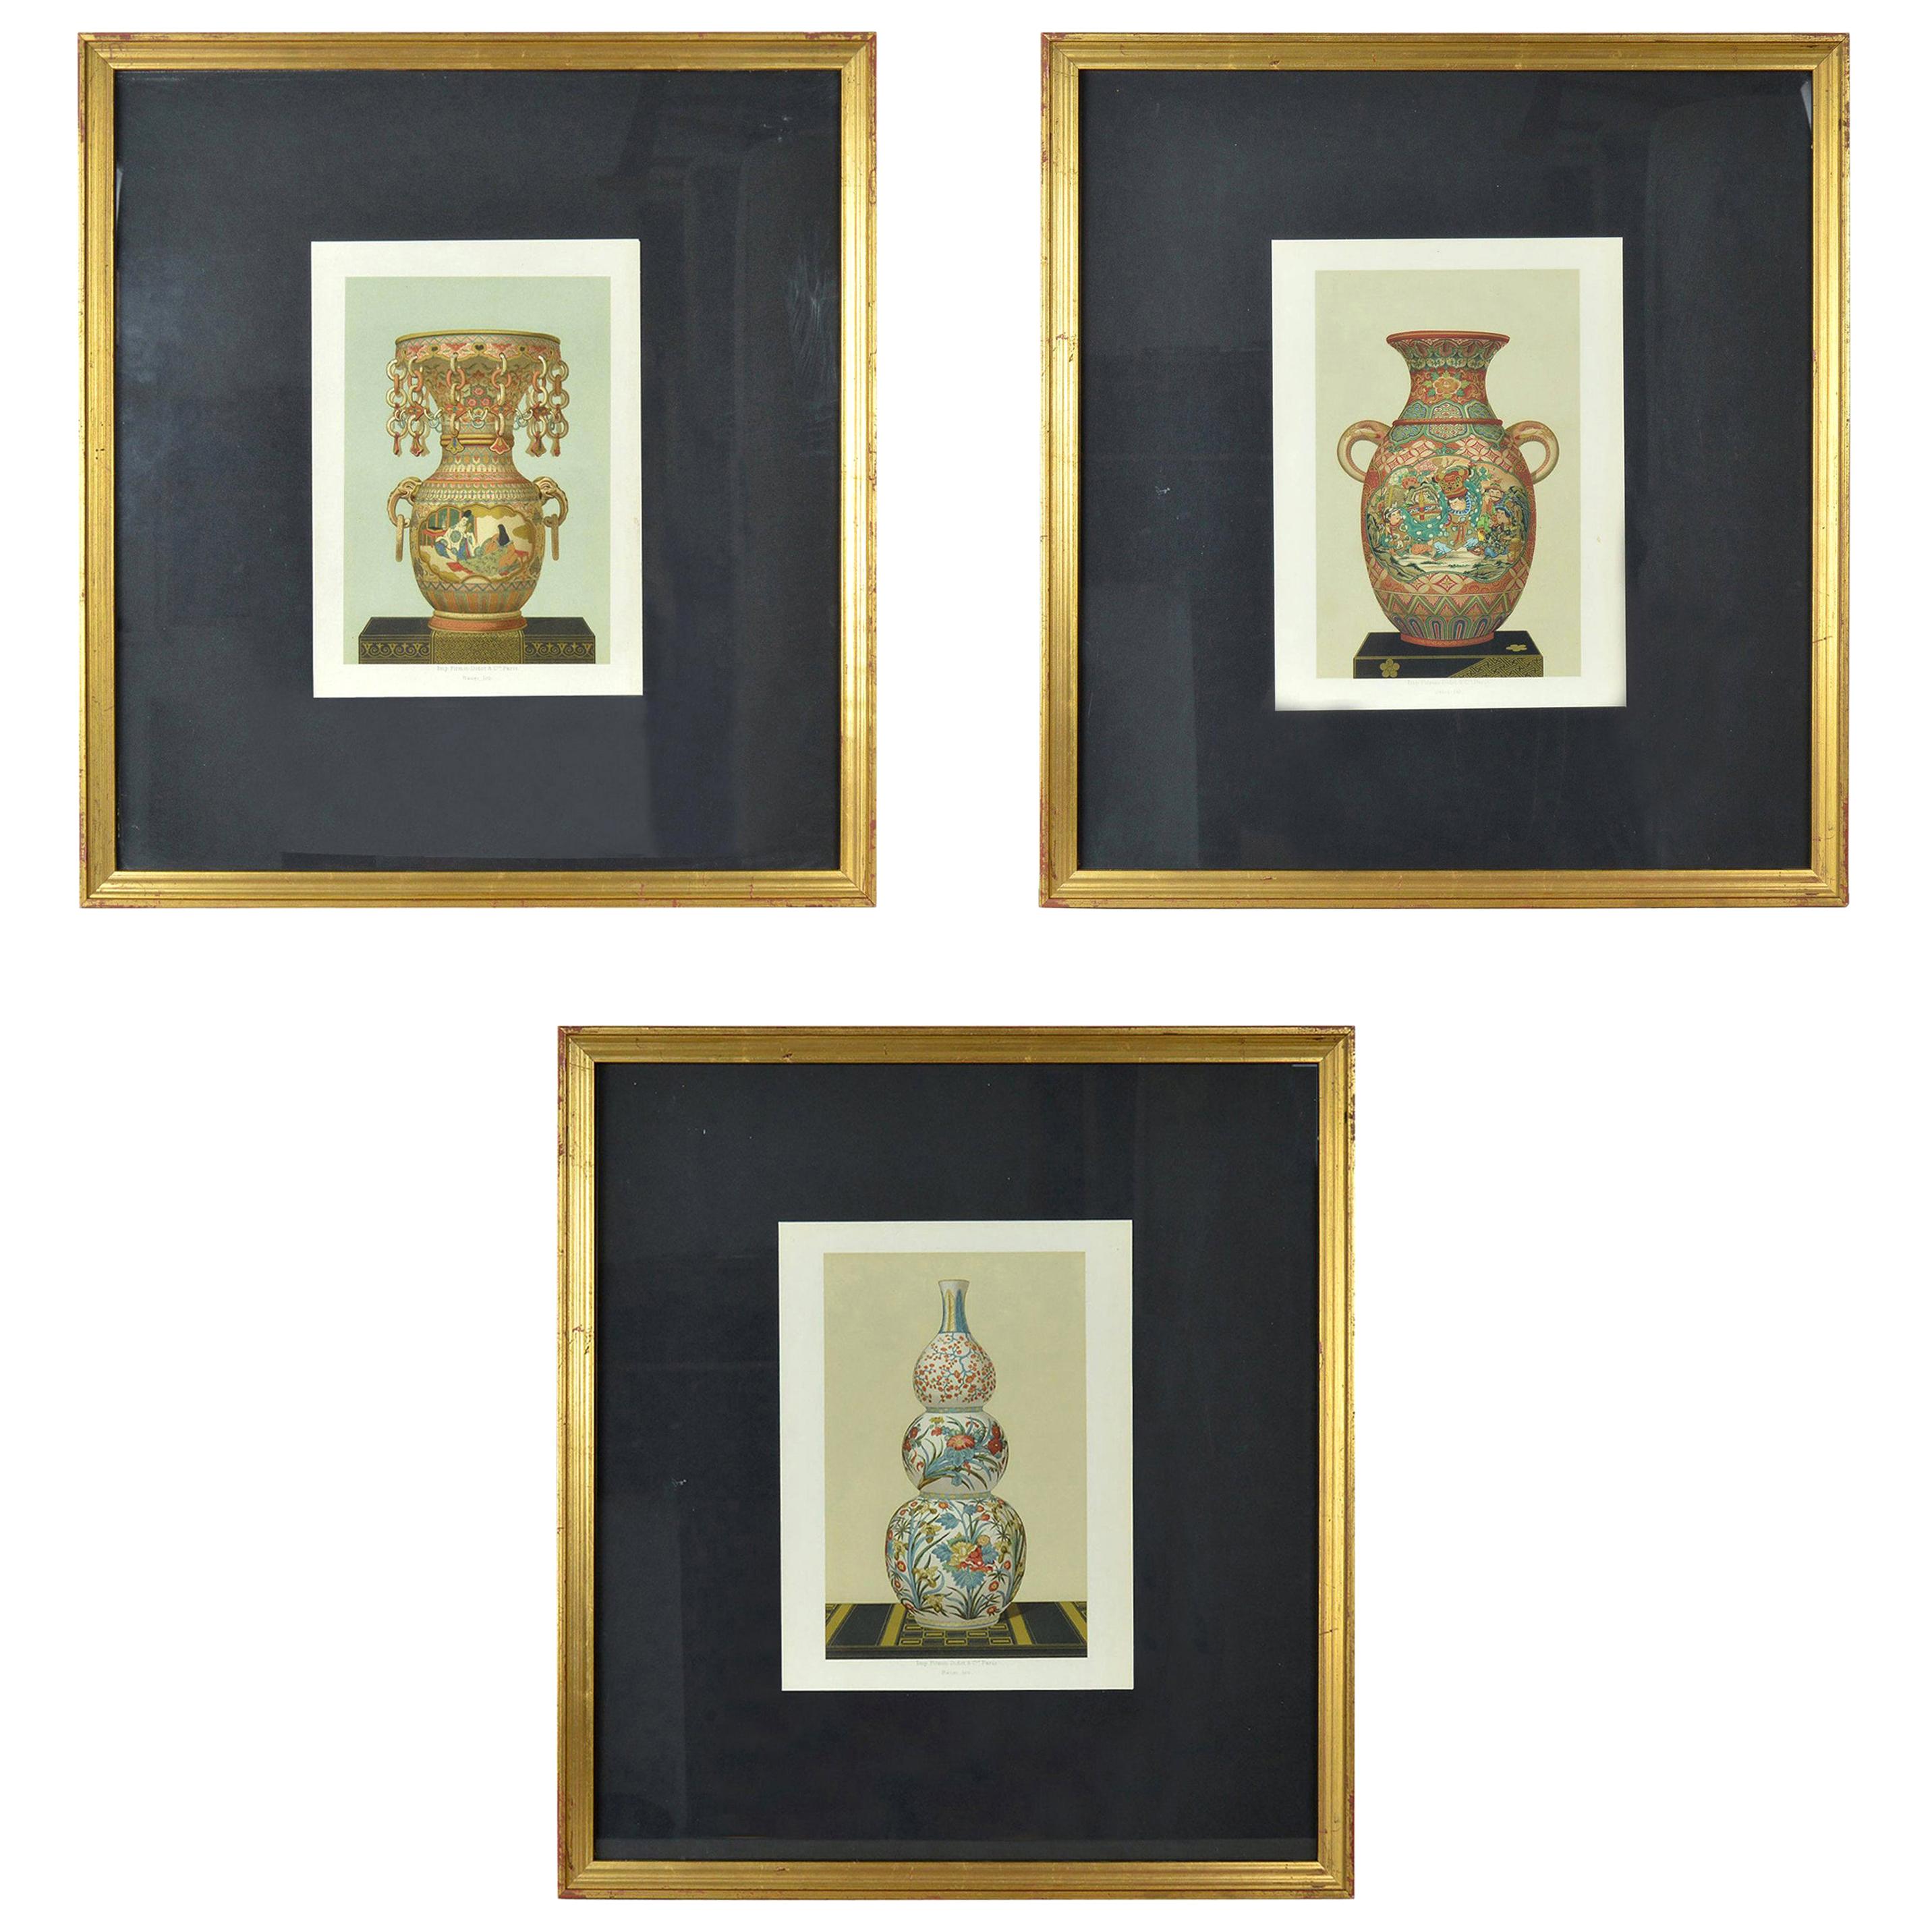 Three Chromolithographs of Japanese Vases by Firmin Didot, Paris